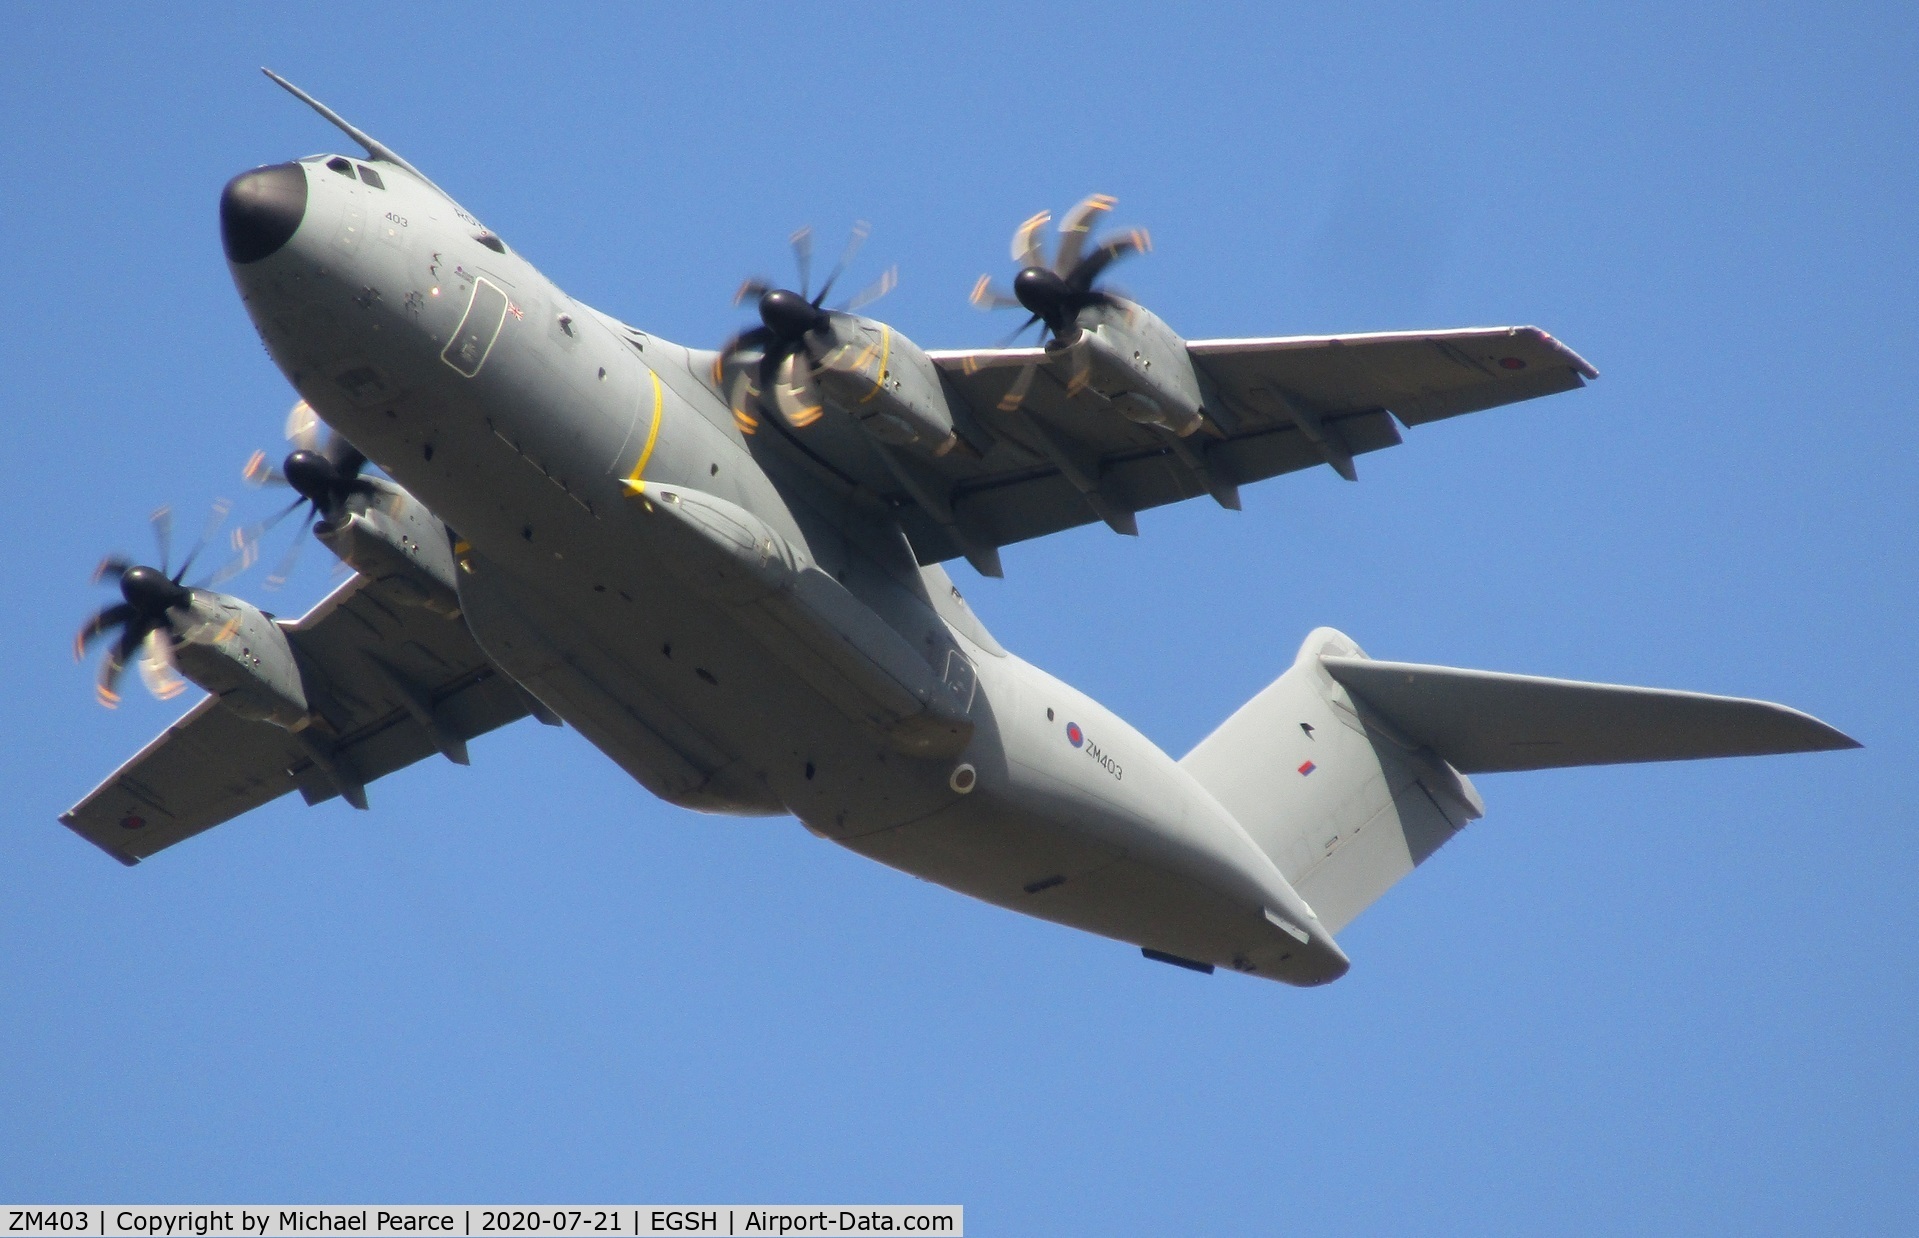 ZM403, 2015 Airbus A400M-180 Atlas C.1 C/N 020, Climbing from an ILS approach of RWY 27.